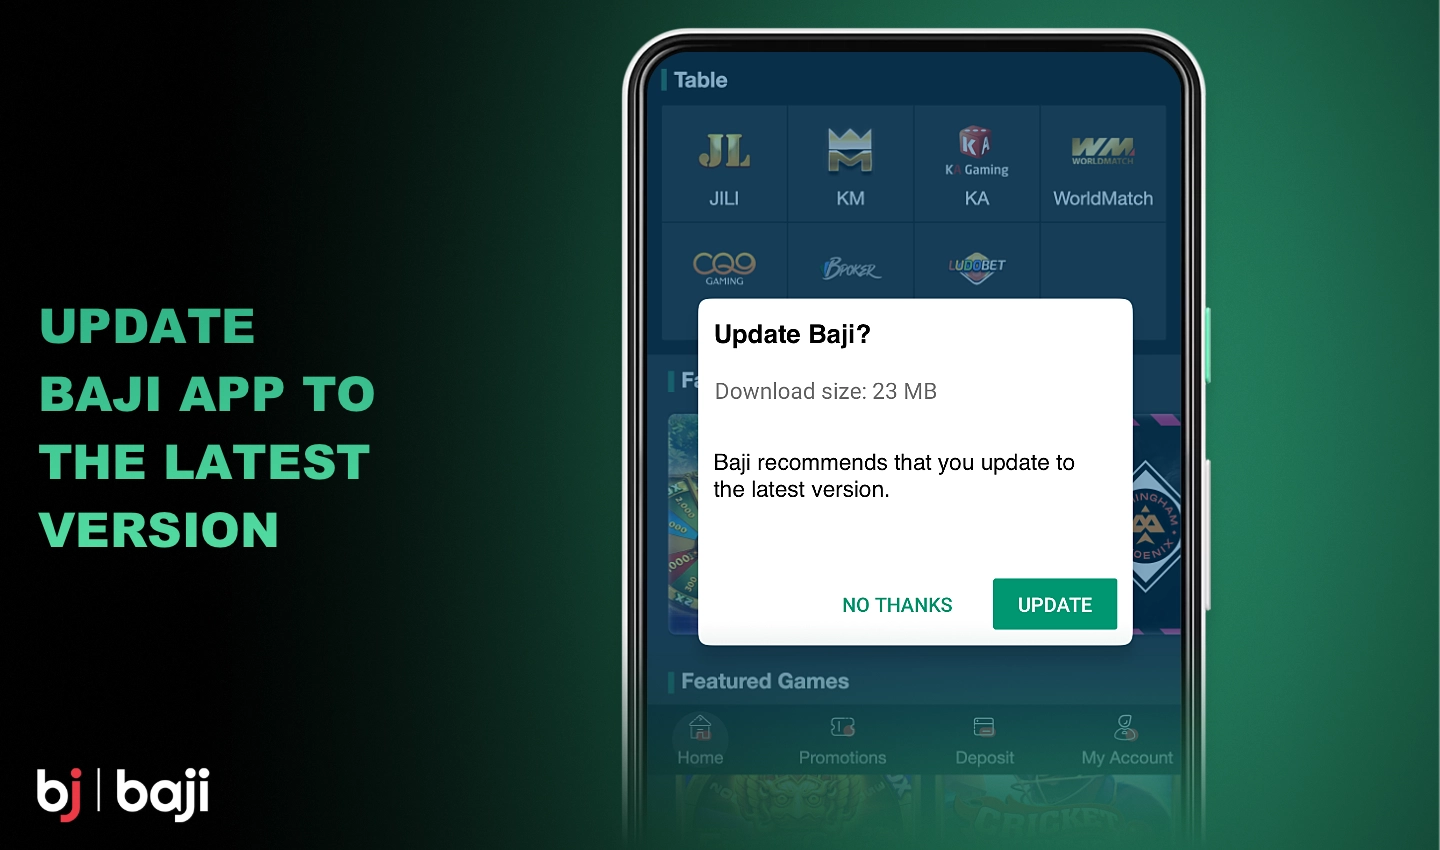 You can update the Baji app to the latest version once the notification is received